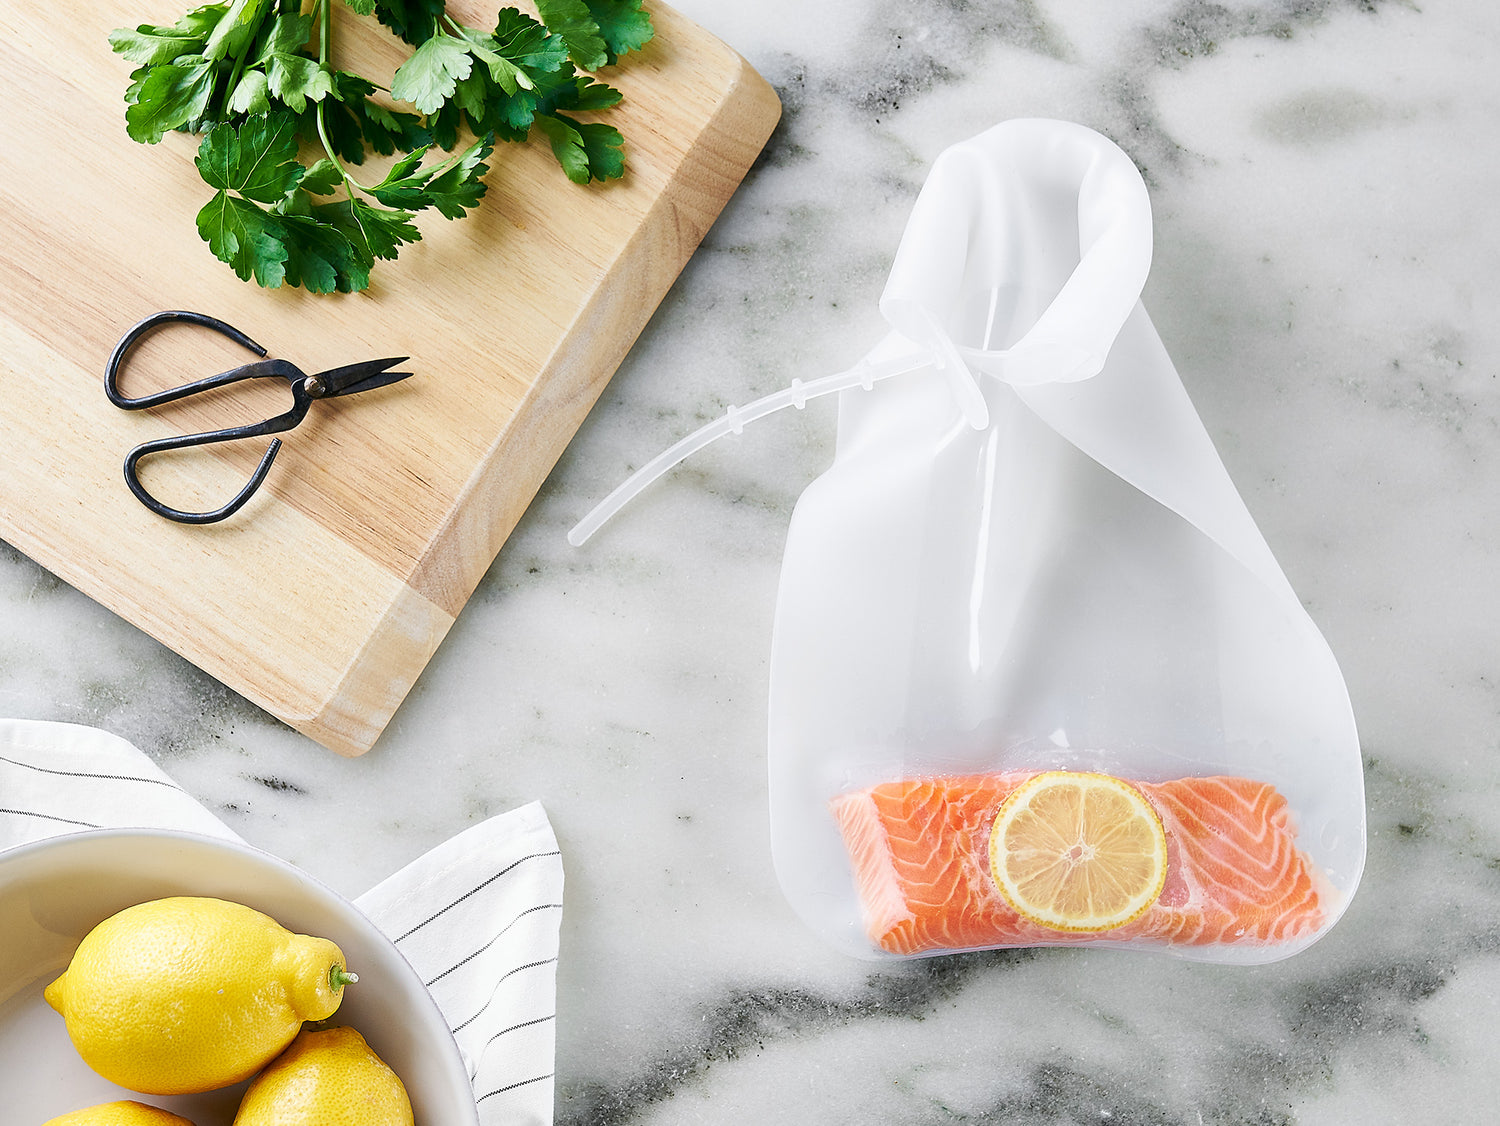 Anova - Introducing the all-new Anova Precision Reusable Silicone Bag!  We've designed this BPA-free bag to be totally food safe while providing an  air tight seal perfect for your sous vide cooks.